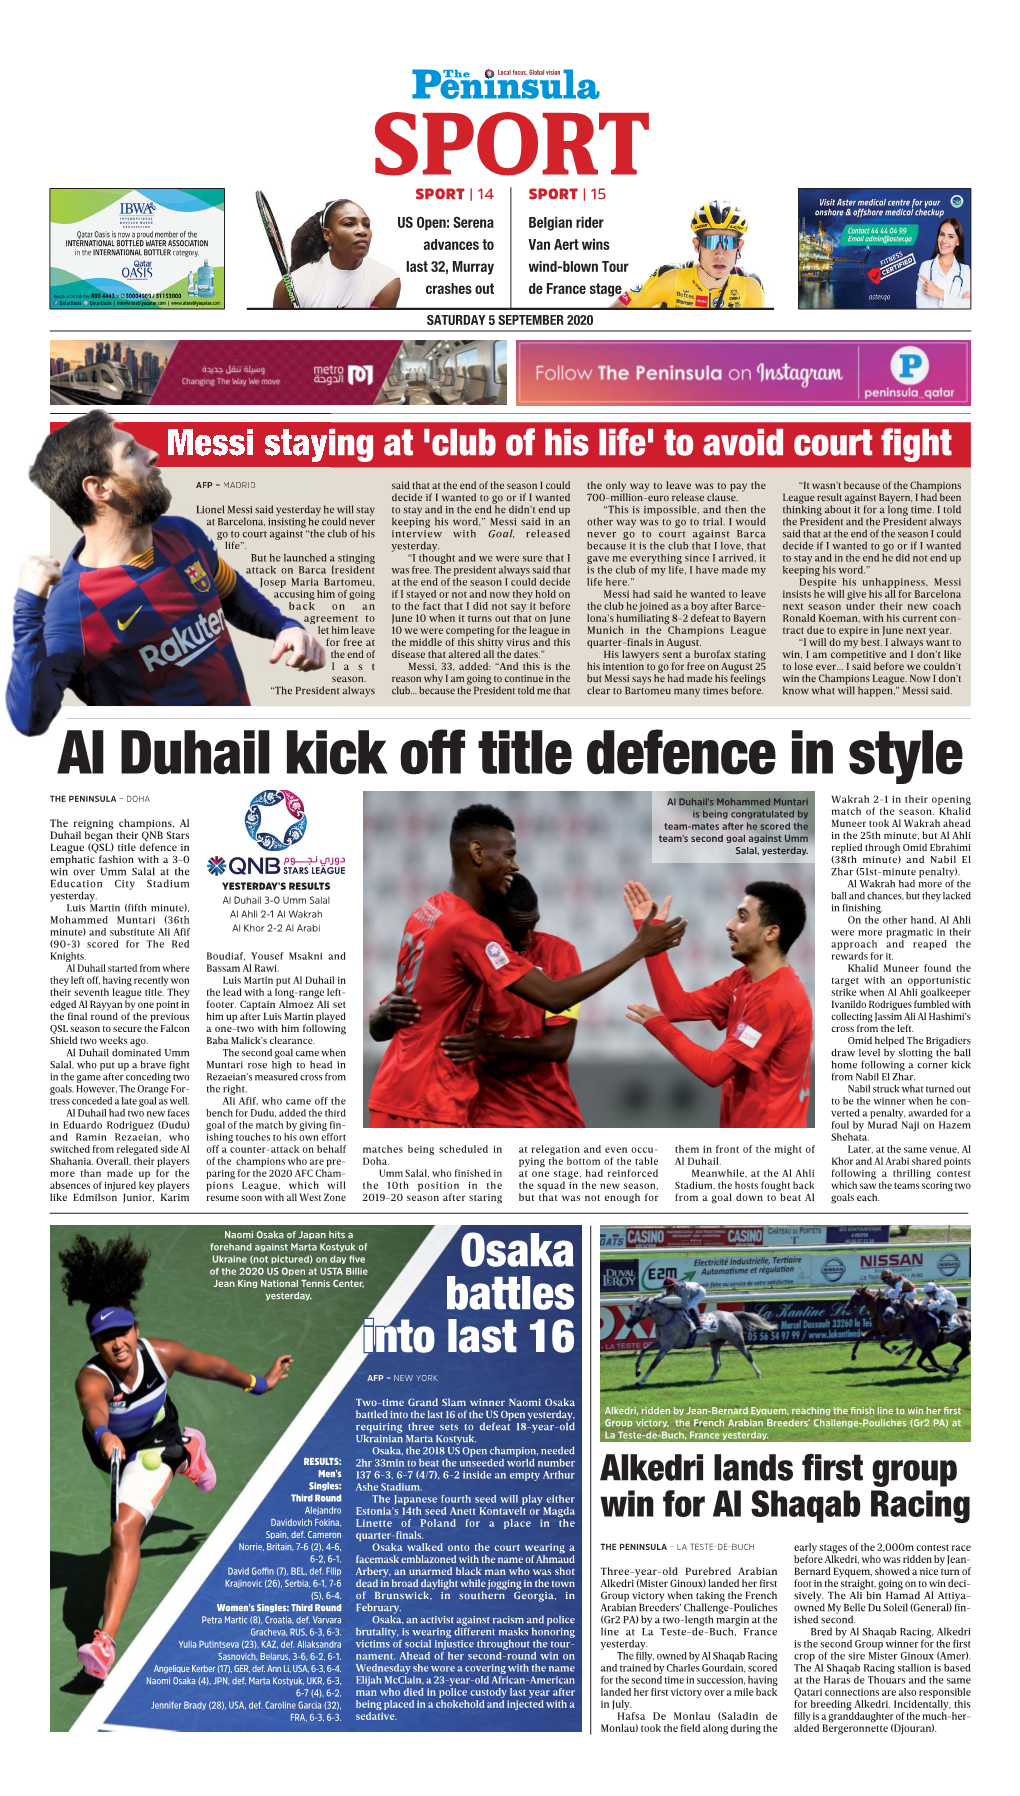 Al Duhail Kick Off Title Defence in Style